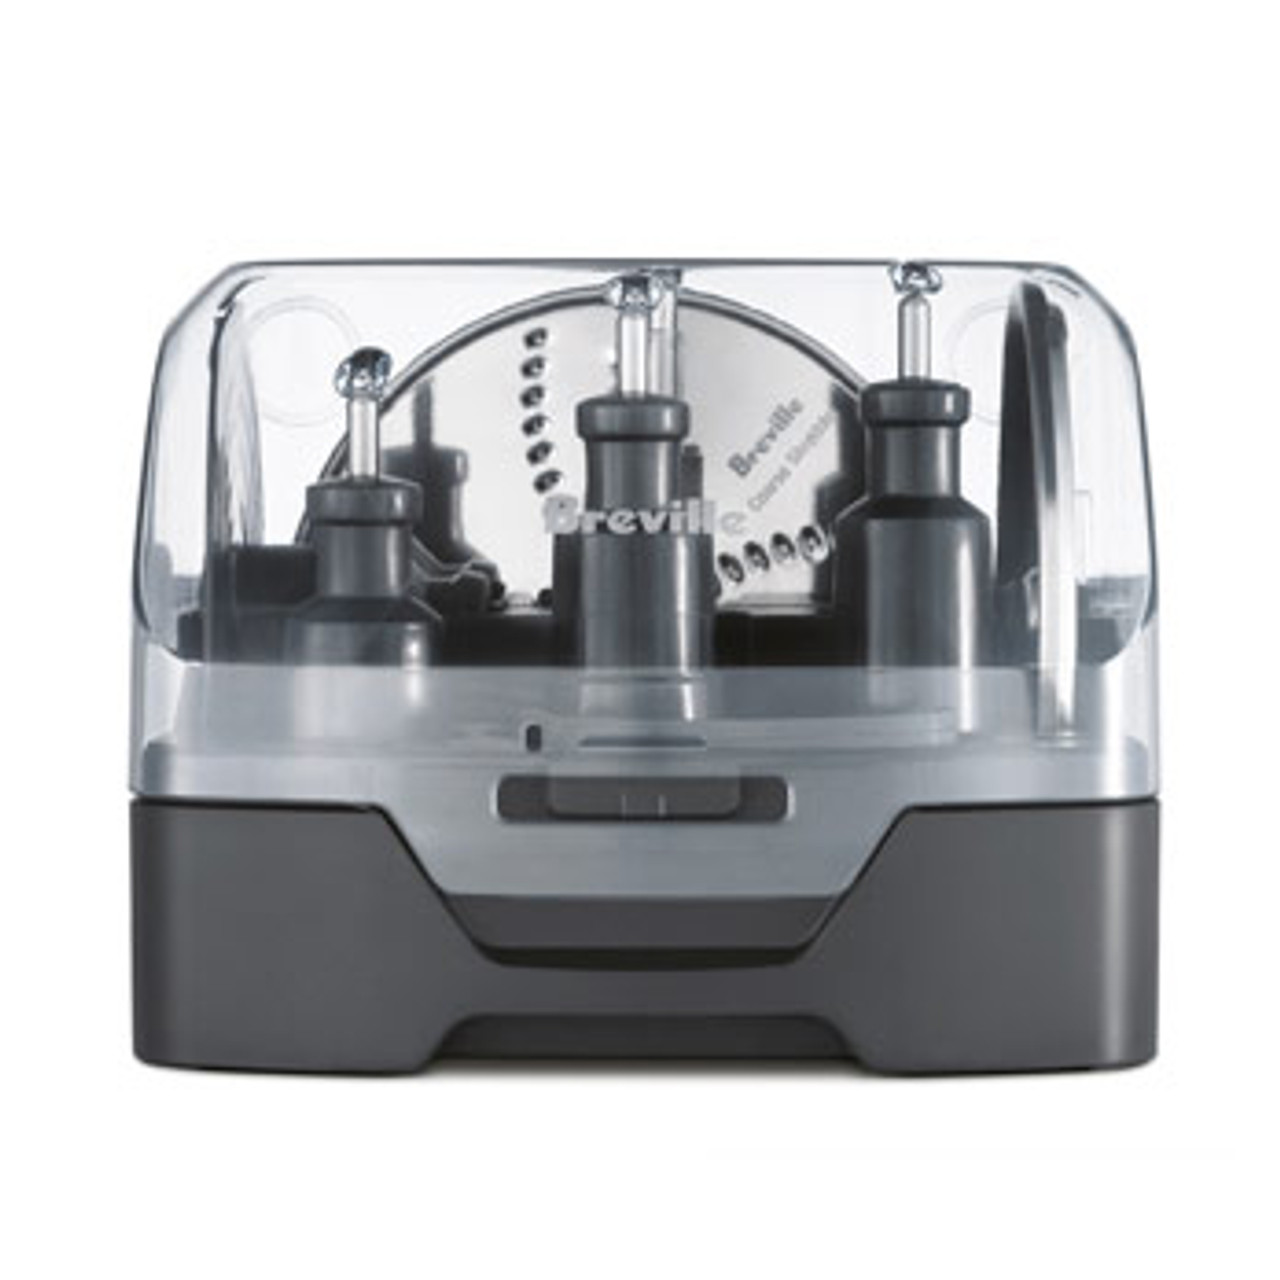 Breville 16-Cup Sous Chef Food Processor, Black Truffle